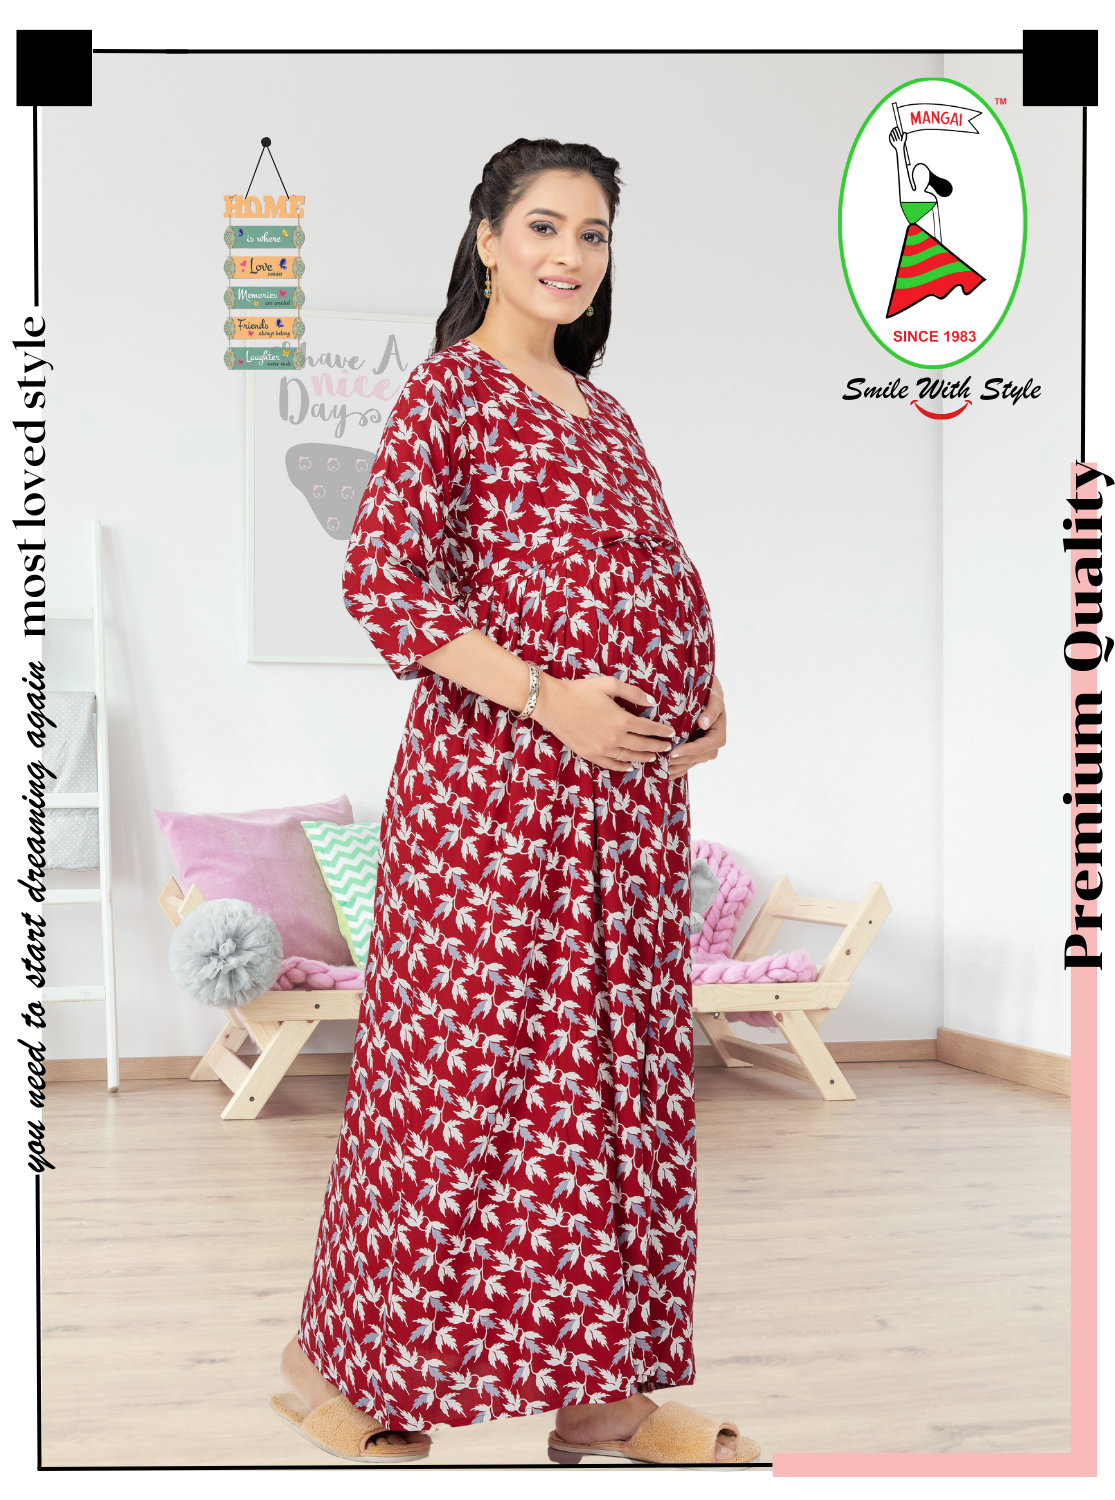 New Collection'sONLY MINE 4-IN-ONE Mom's Wear - Soft & Smooth Rayon | Maternity | Feeding | Maxi | Long Frock | Casual Wear | Perfect Maternity Collection for Pregnancy Women's